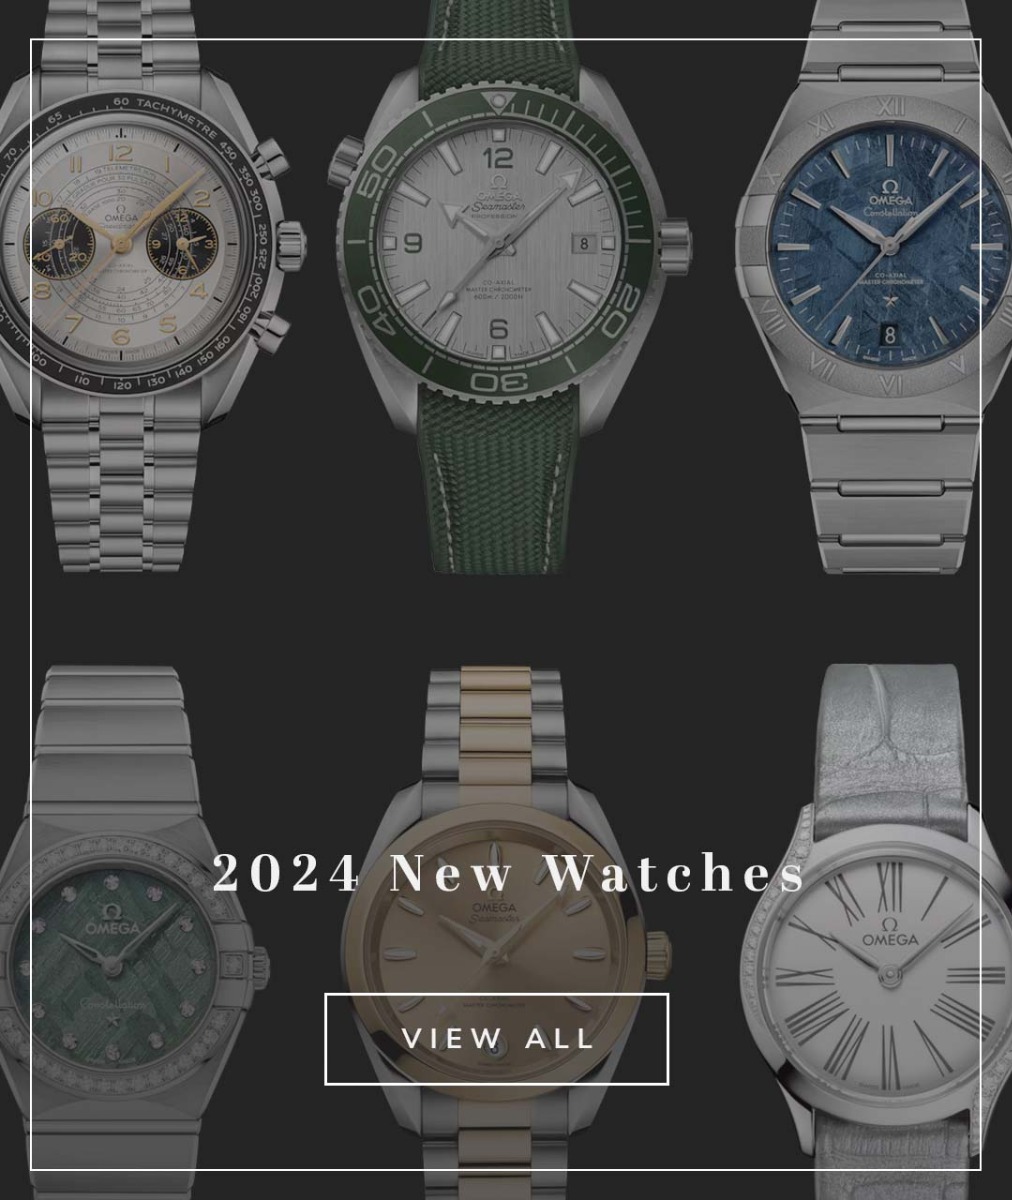 Several OMEGA watches on a black background with text 2024 new watches view all